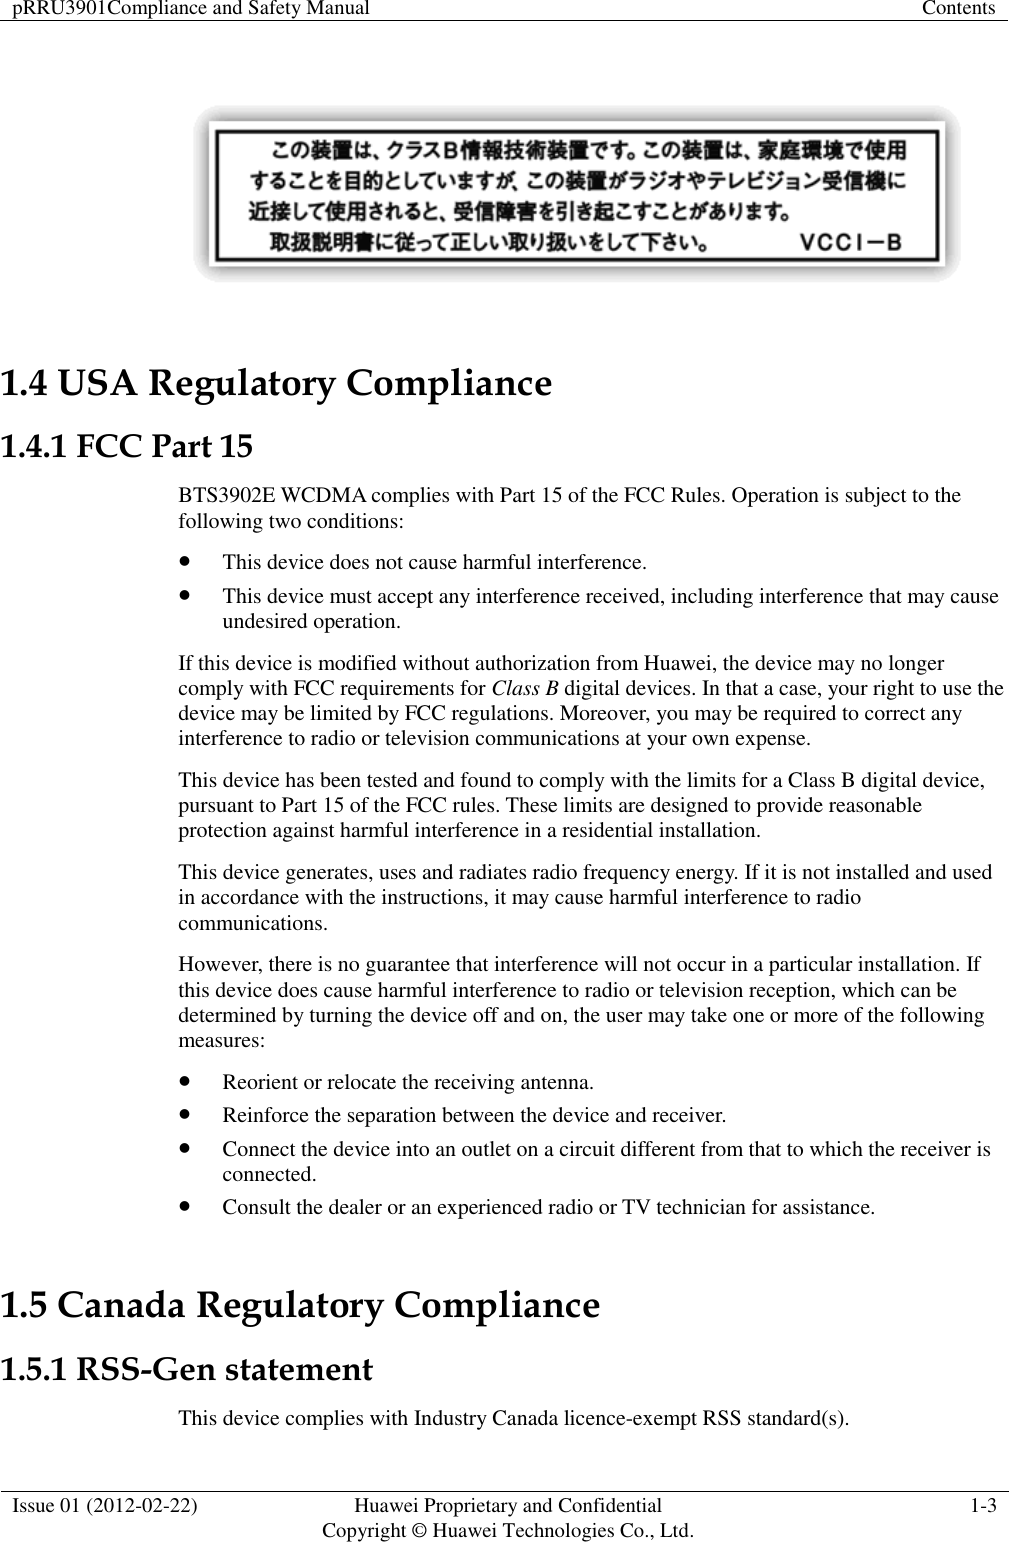 pRRU3901Compliance and Safety Manual Contents  Issue 01 (2012-02-22) Huawei Proprietary and Confidential           Copyright © Huawei Technologies Co., Ltd. 1-3    1.4 USA Regulatory Compliance 1.4.1 FCC Part 15 BTS3902E WCDMA complies with Part 15 of the FCC Rules. Operation is subject to the following two conditions:  This device does not cause harmful interference.  This device must accept any interference received, including interference that may cause undesired operation. If this device is modified without authorization from Huawei, the device may no longer comply with FCC requirements for Class B digital devices. In that a case, your right to use the device may be limited by FCC regulations. Moreover, you may be required to correct any interference to radio or television communications at your own expense. This device has been tested and found to comply with the limits for a Class B digital device, pursuant to Part 15 of the FCC rules. These limits are designed to provide reasonable protection against harmful interference in a residential installation. This device generates, uses and radiates radio frequency energy. If it is not installed and used in accordance with the instructions, it may cause harmful interference to radio communications. However, there is no guarantee that interference will not occur in a particular installation. If this device does cause harmful interference to radio or television reception, which can be determined by turning the device off and on, the user may take one or more of the following measures:  Reorient or relocate the receiving antenna.  Reinforce the separation between the device and receiver.  Connect the device into an outlet on a circuit different from that to which the receiver is connected.  Consult the dealer or an experienced radio or TV technician for assistance. 1.5 Canada Regulatory Compliance 1.5.1 RSS-Gen statement This device complies with Industry Canada licence-exempt RSS standard(s). 